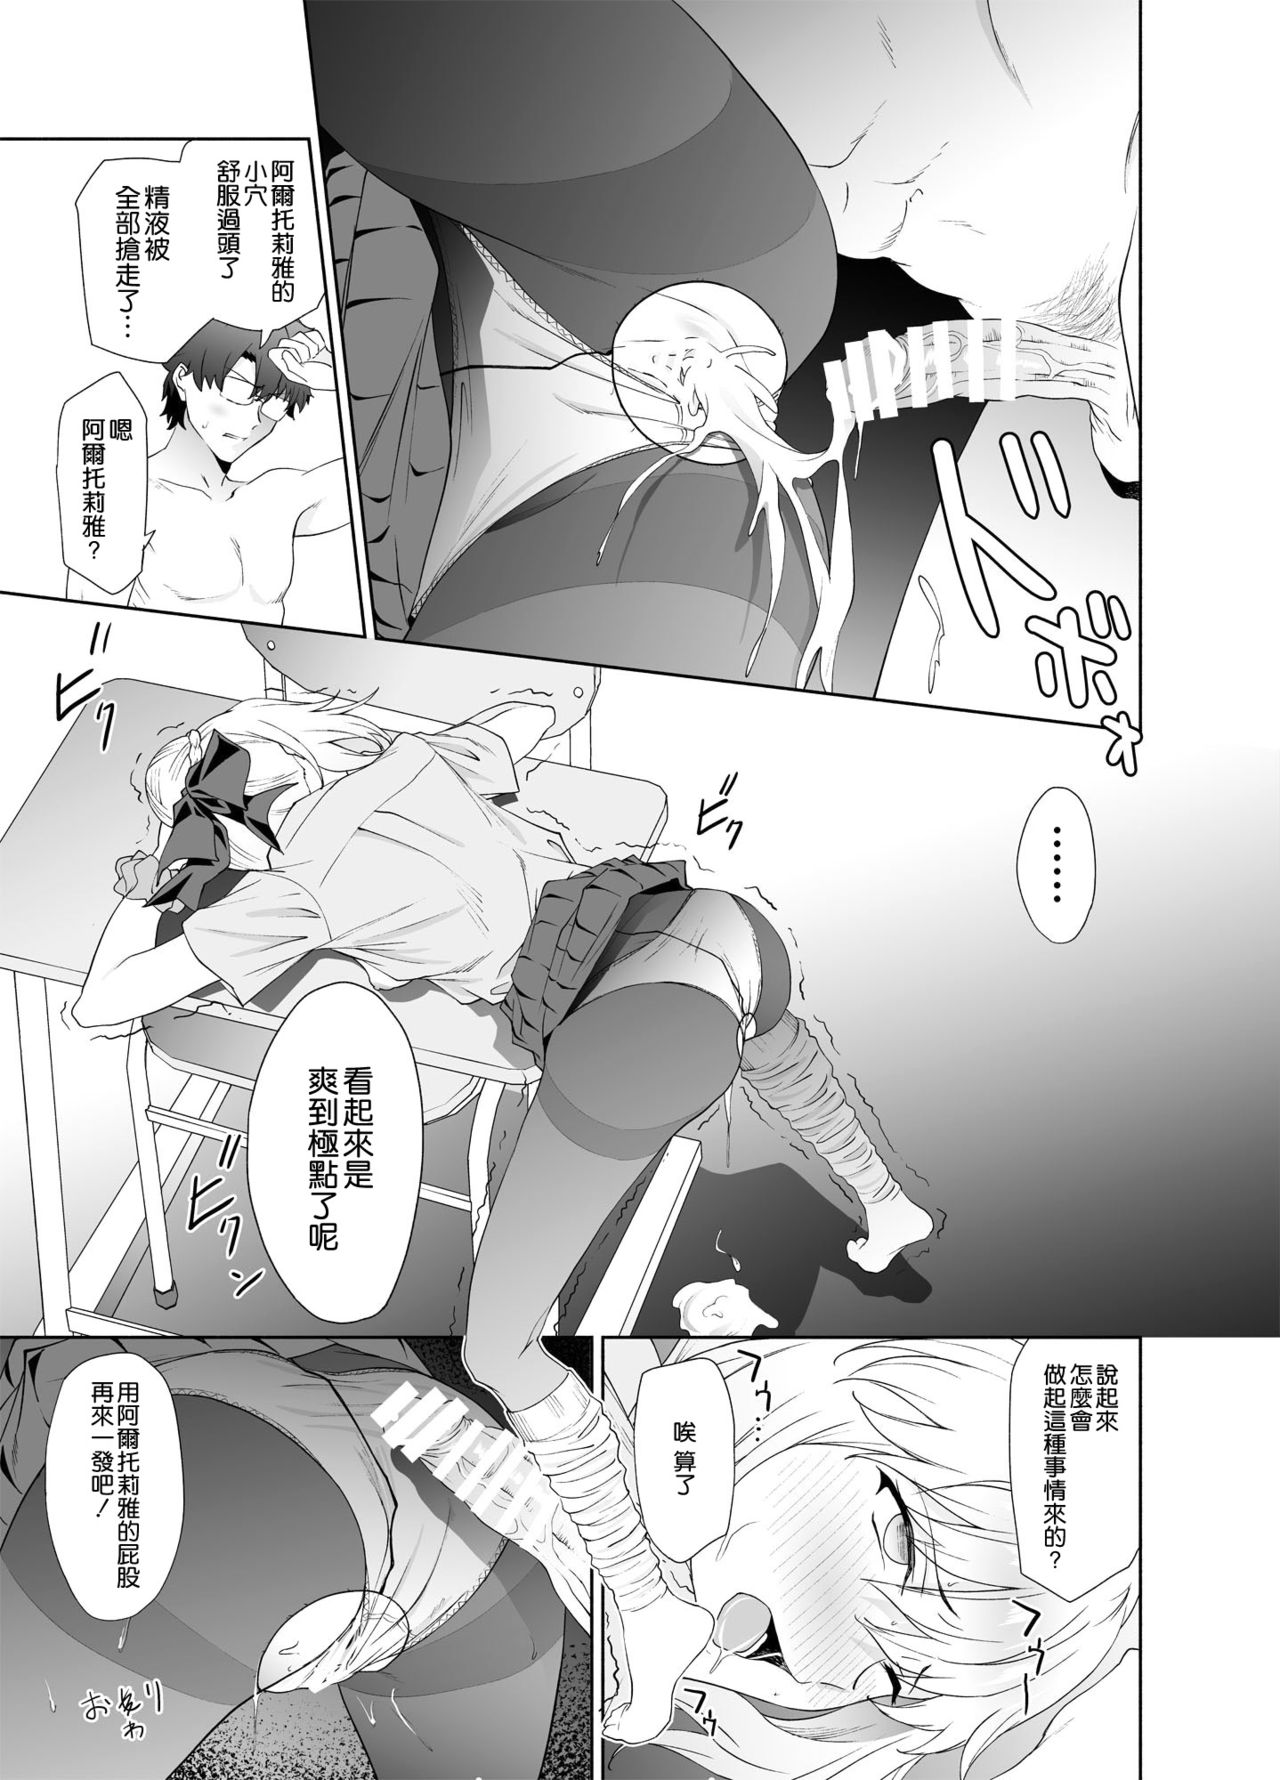 [EXTENDED PART (Endo Yoshiki)] JK Arturia [Alter] (Fate/Grand Order) [Chinese] [空気系☆漢化] [Digital] page 21 full